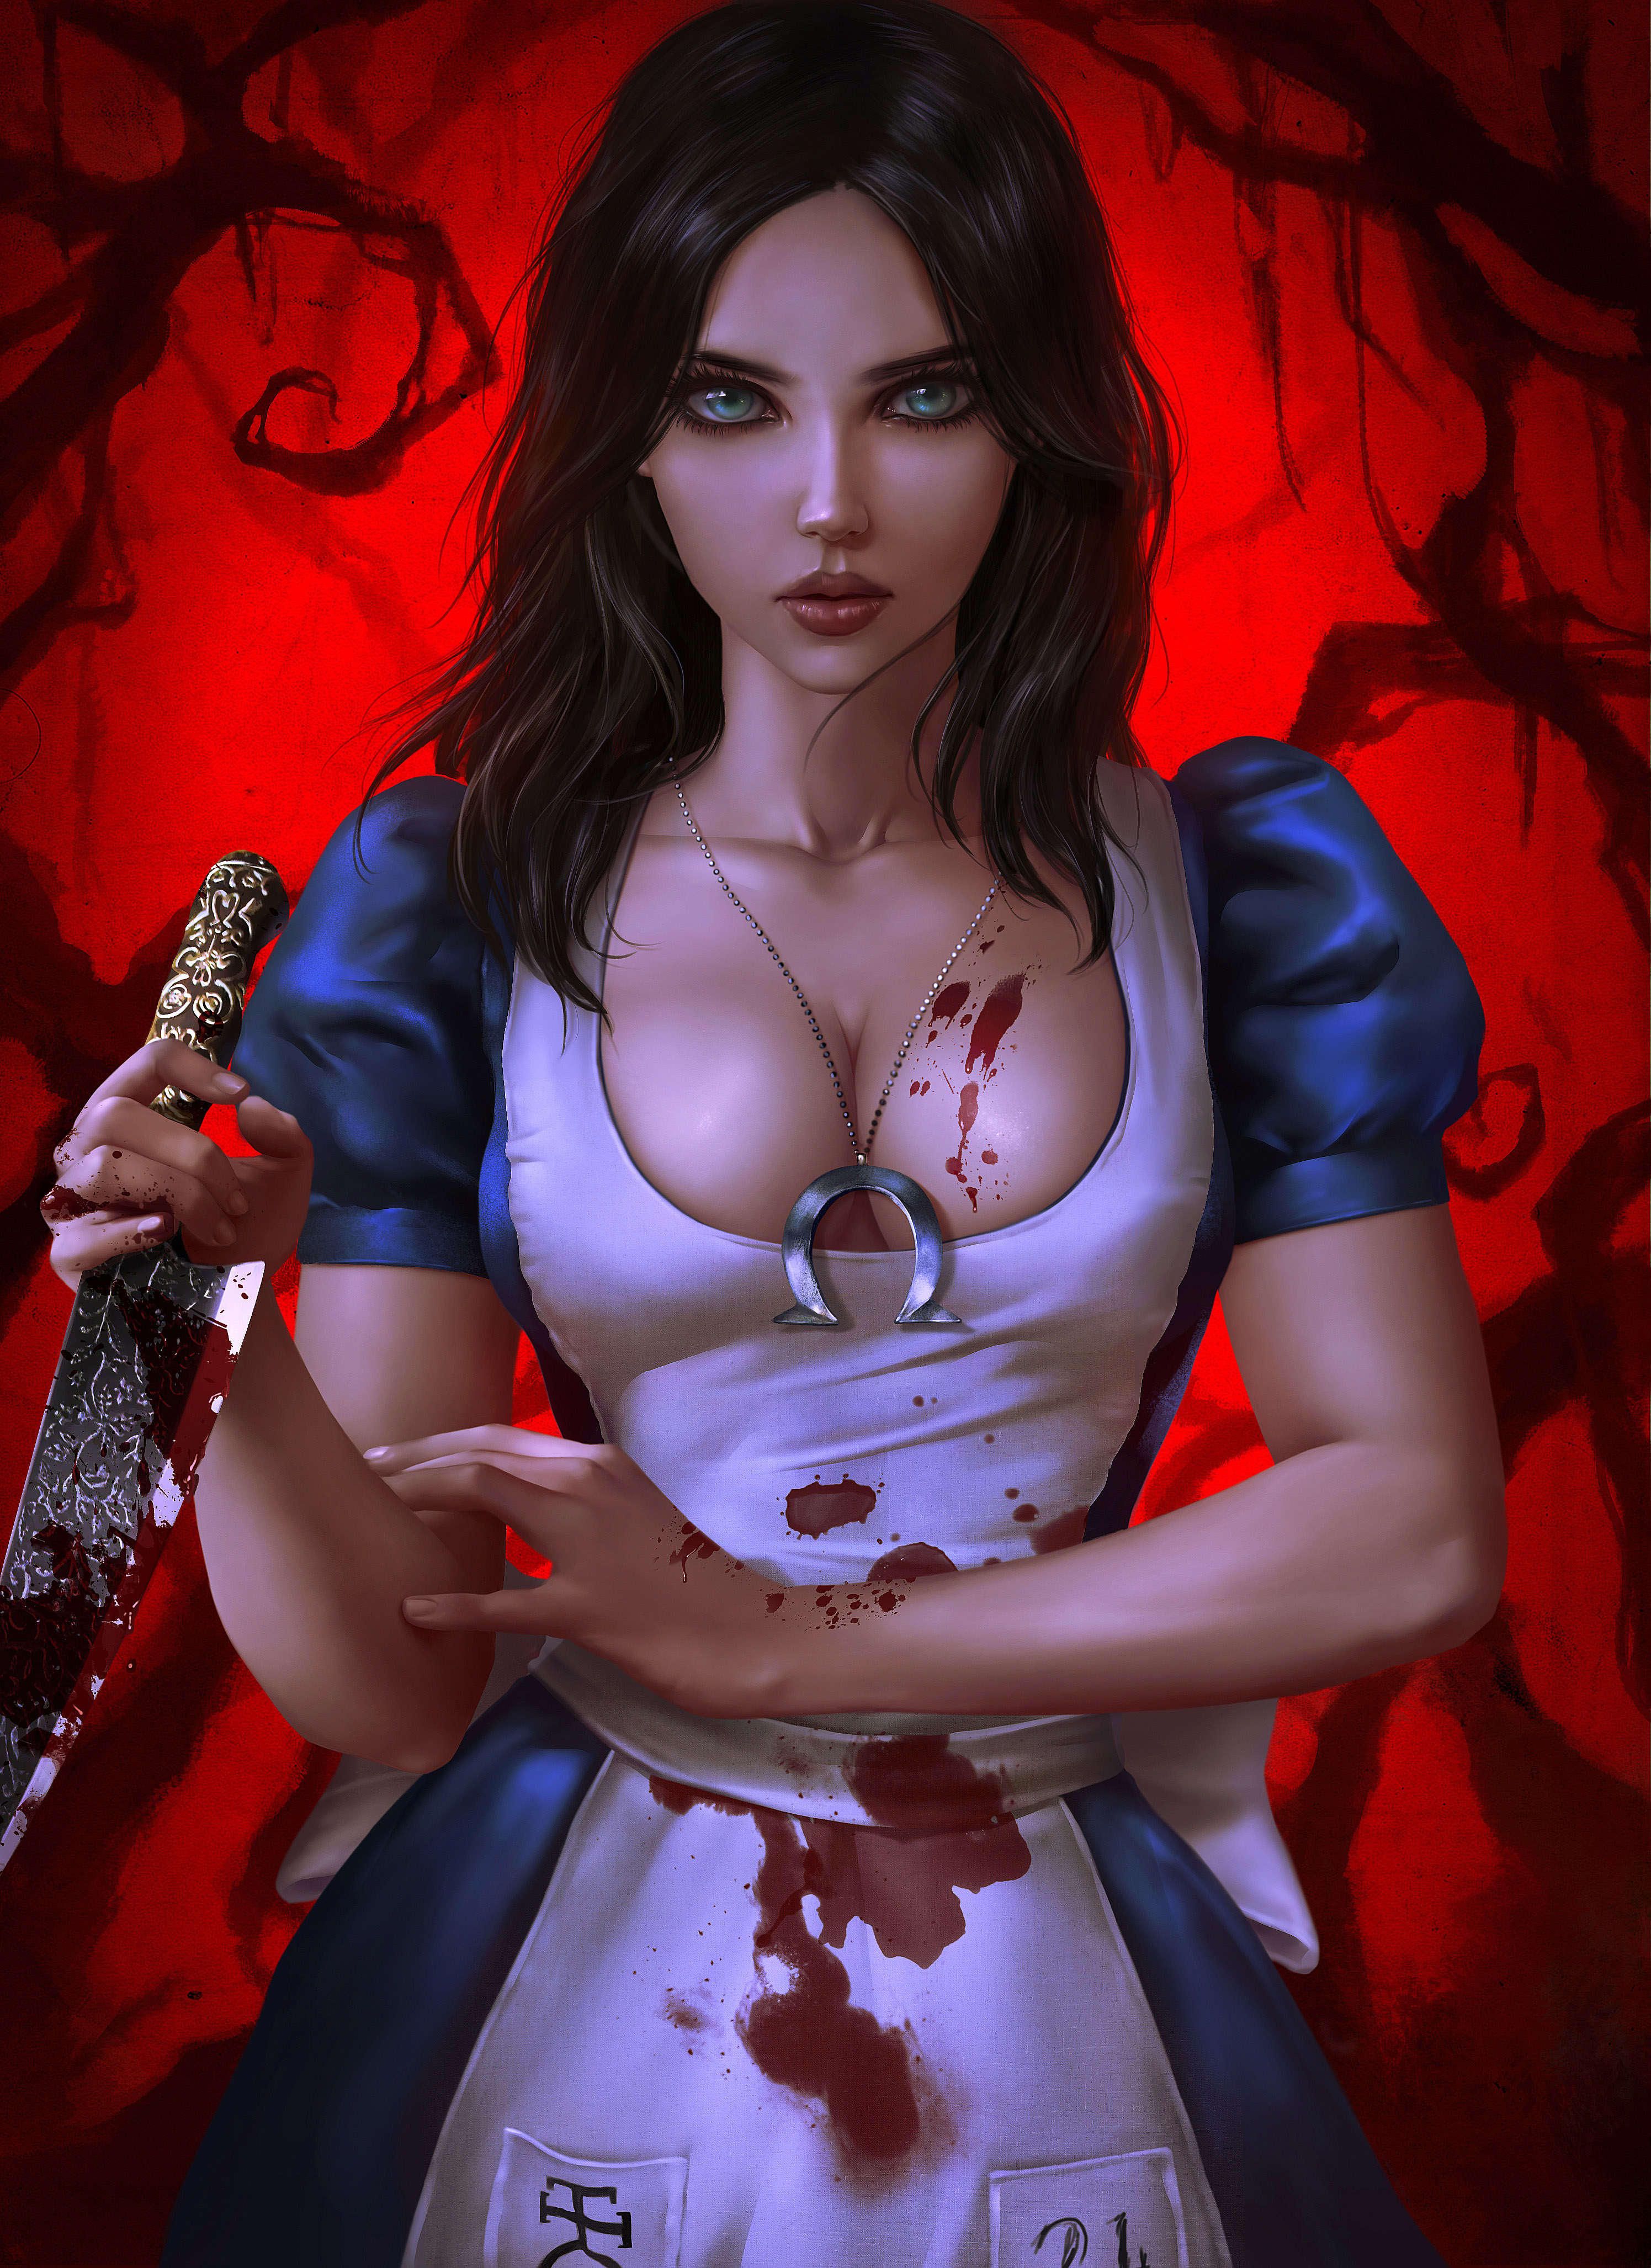 General 2991x4109 digital art artwork women portrait display video games blue eyes long hair brunette cleavage blood knife Alice: Madness Returns tight clothing Alice American McGee's Alice Logan Cure Alice Lidell  cropped